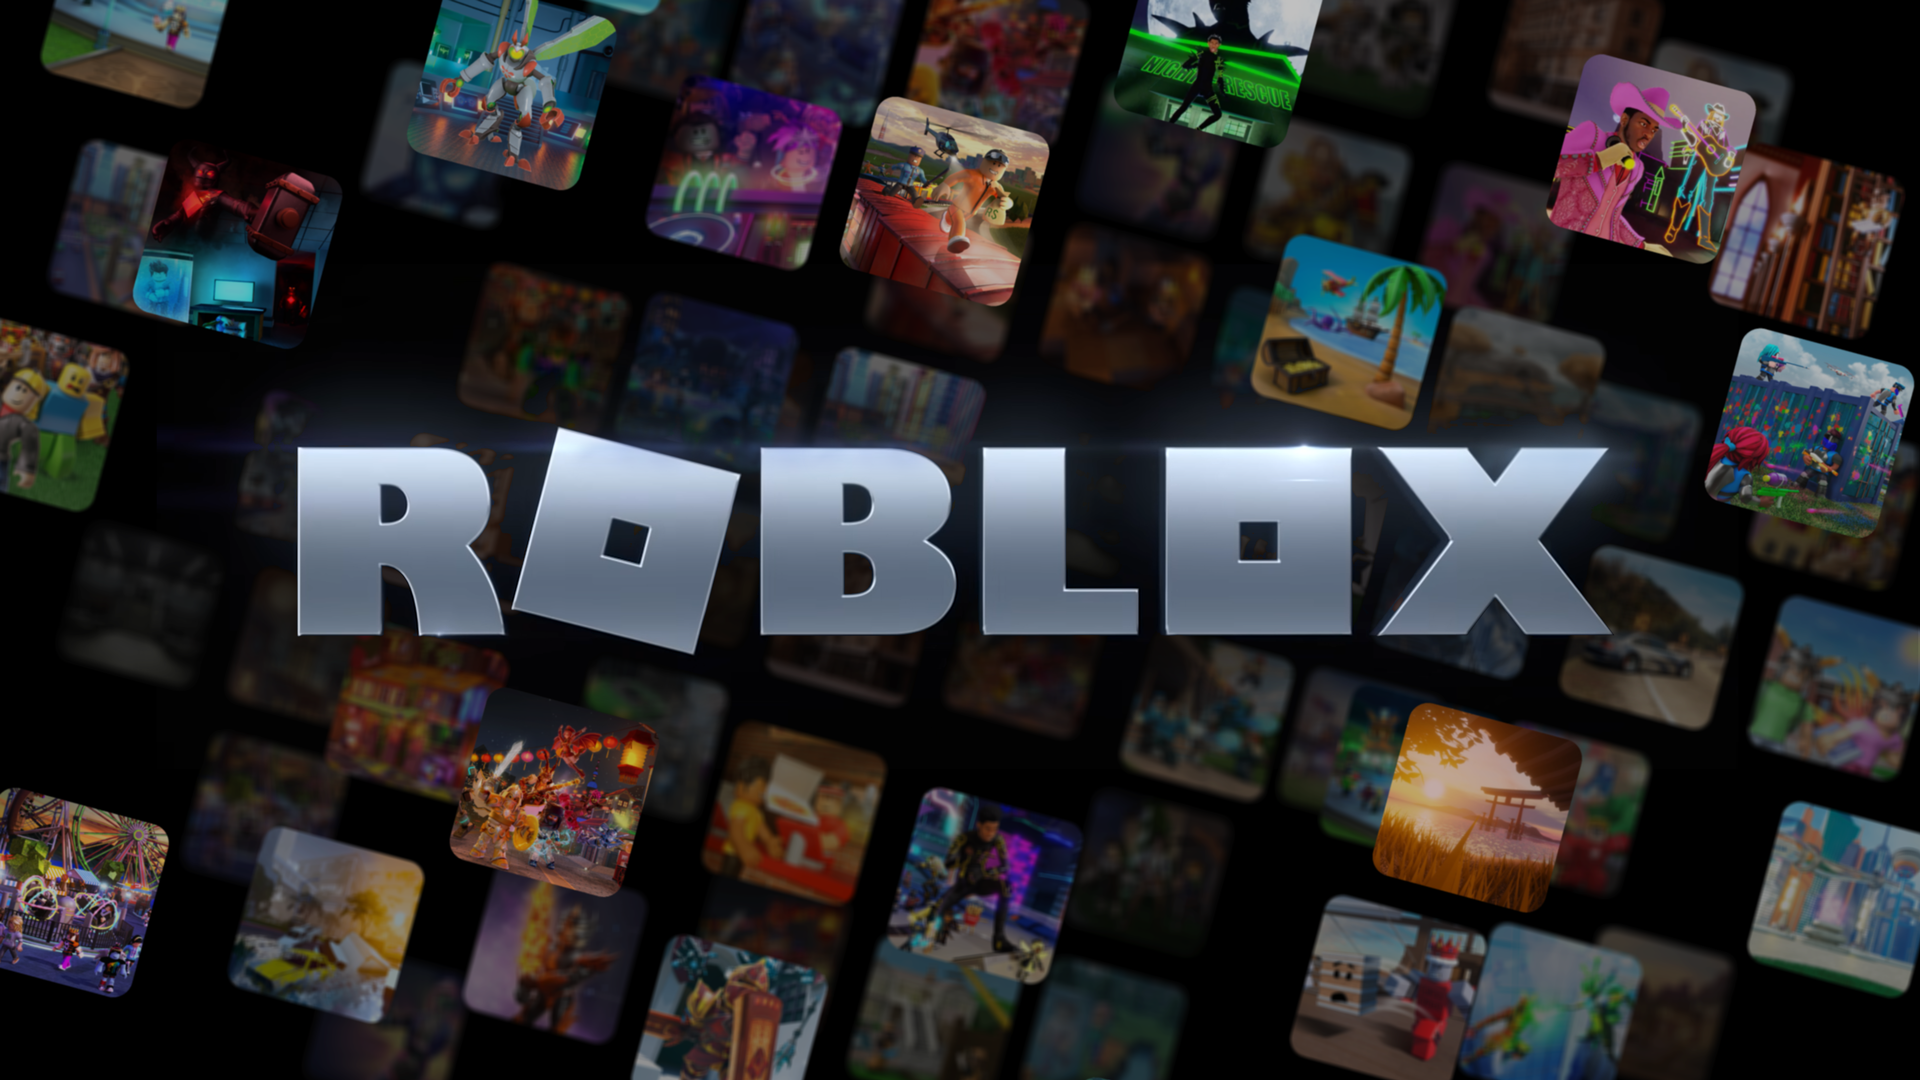 Roblox Statistics By Users and Revenue